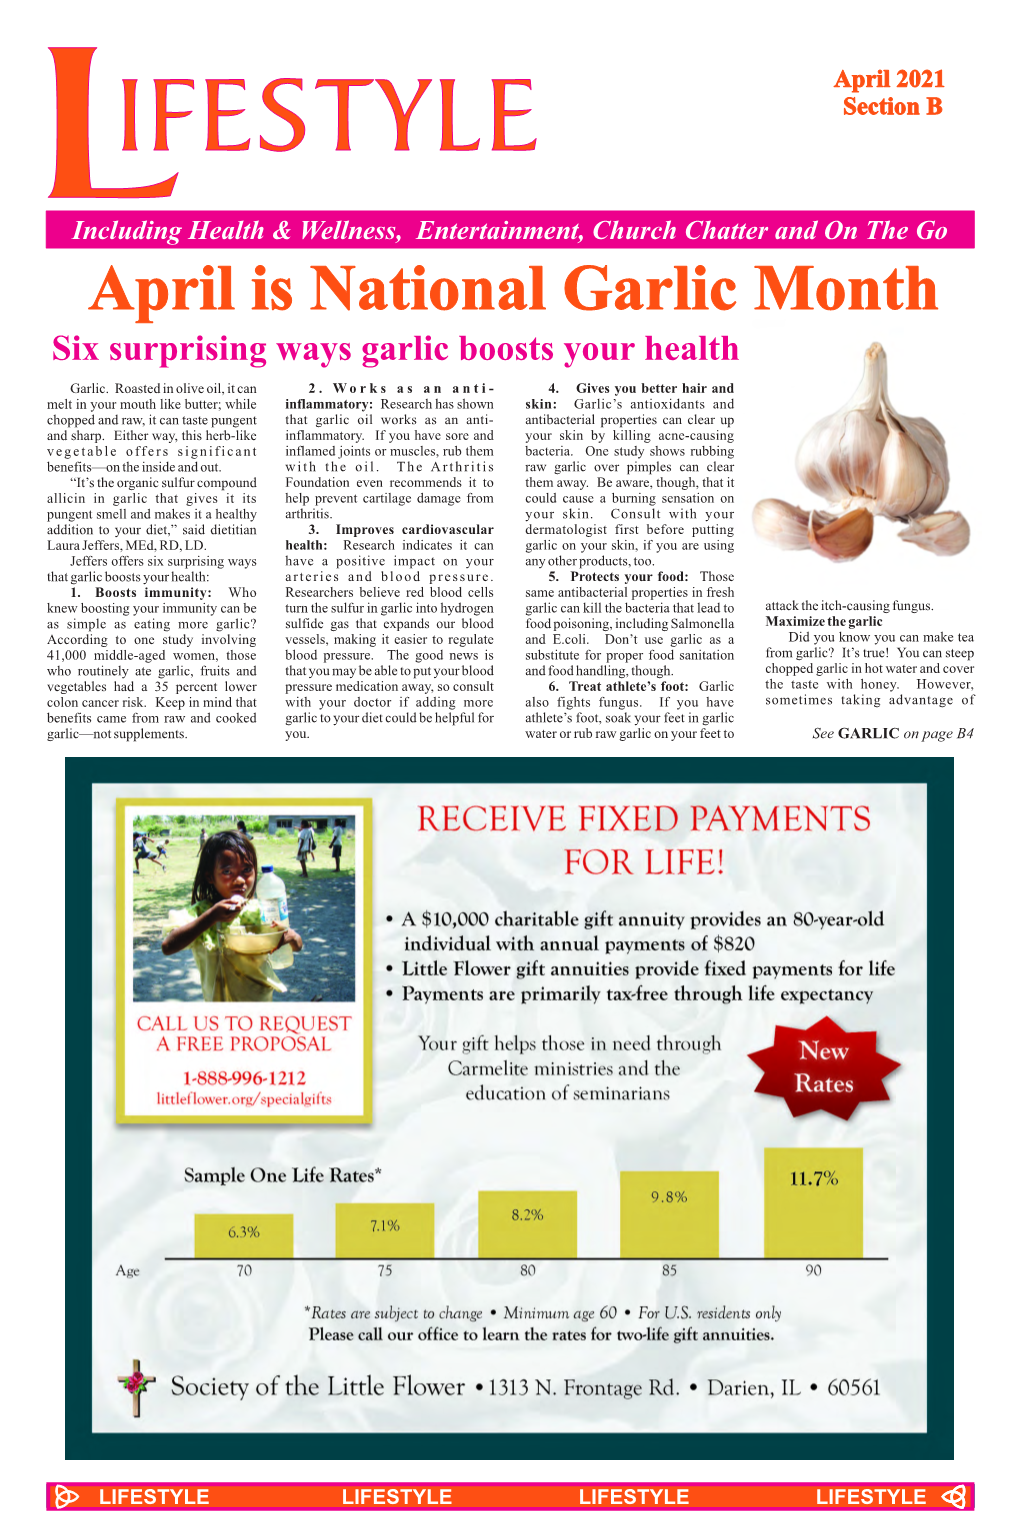 April Is National Garlic Month “You’Ll Get the Most Benefit from Raw Garlic,” She Said